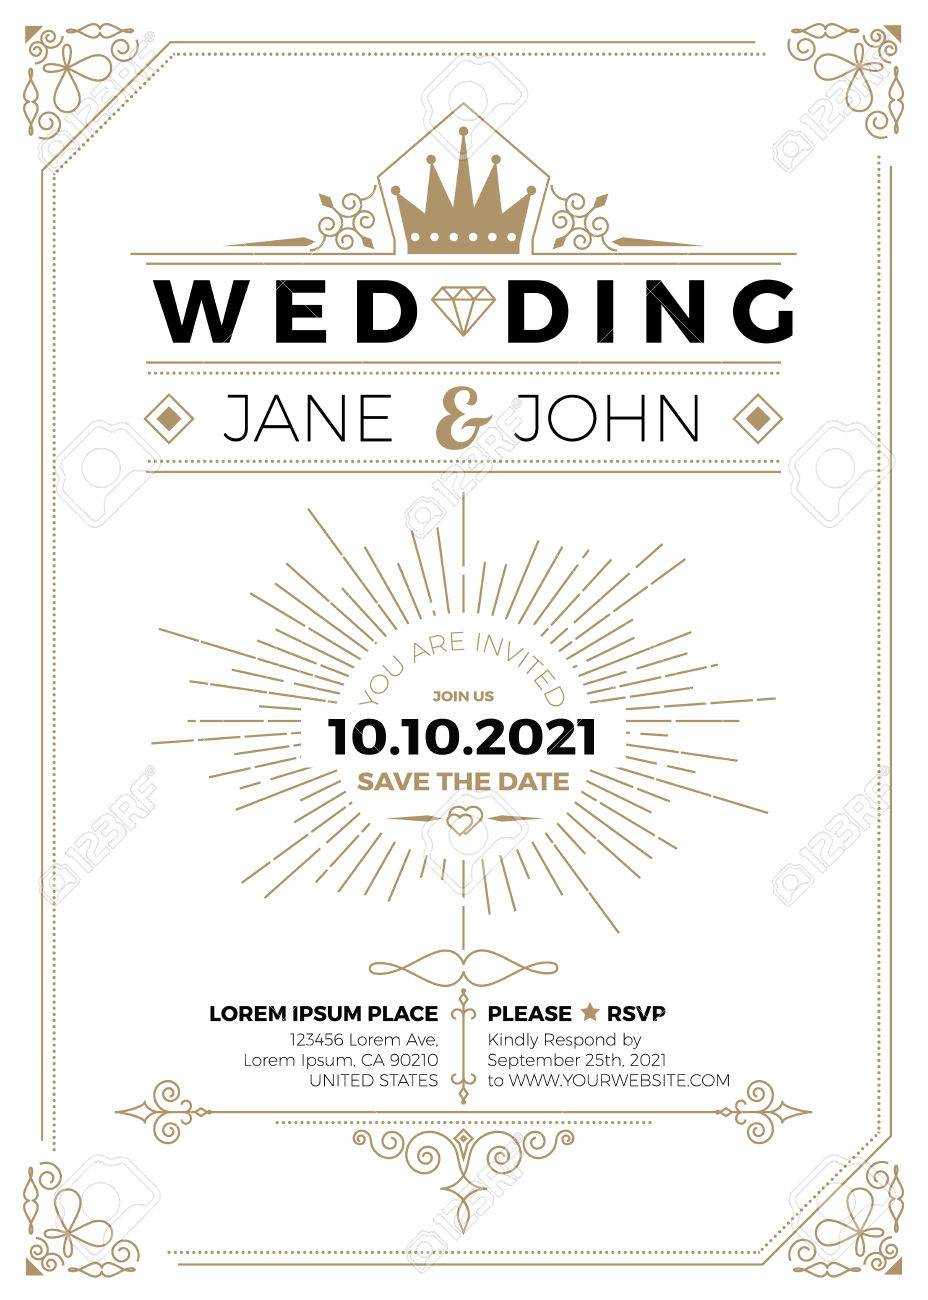 Vintage Wedding Invitation Card A5 Size Frame Layout Print Template Intended For Wedding Card Size Template